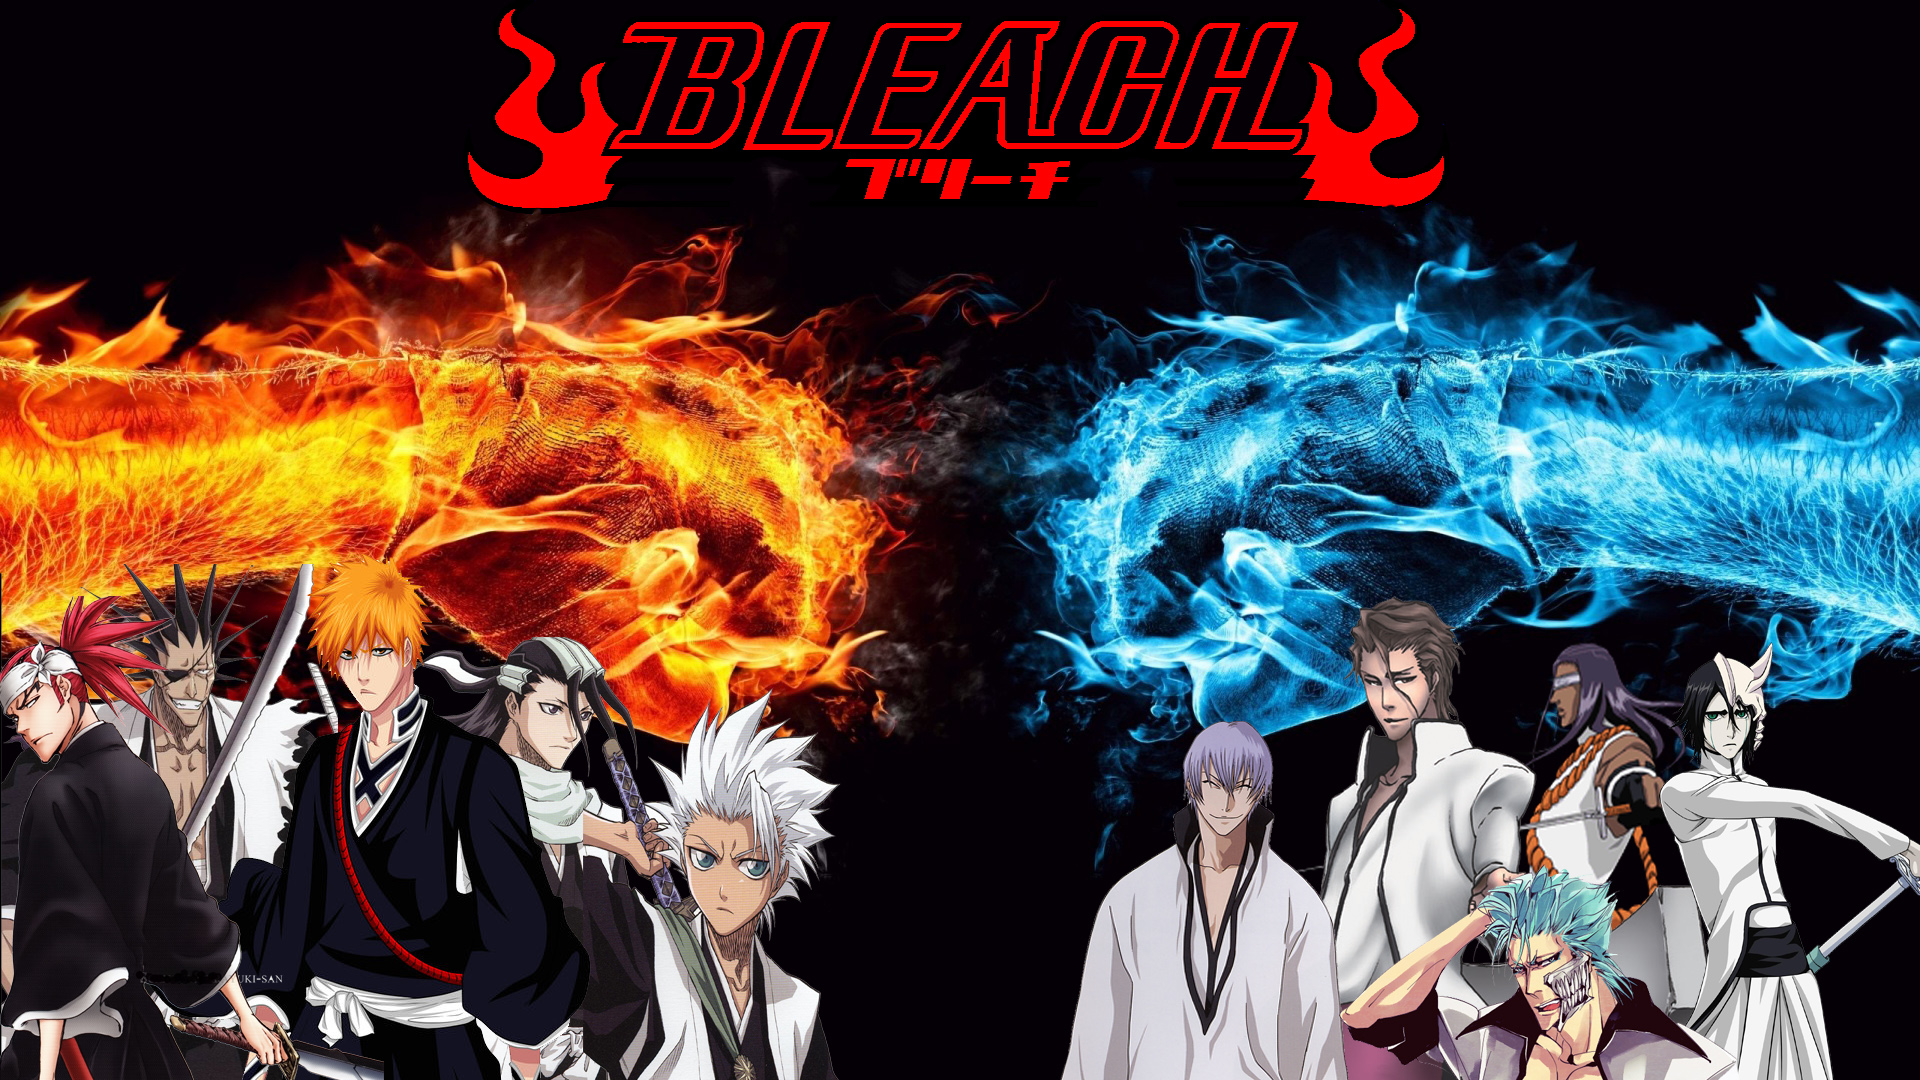 Bleach Anime Wallpaper Which Is Under The